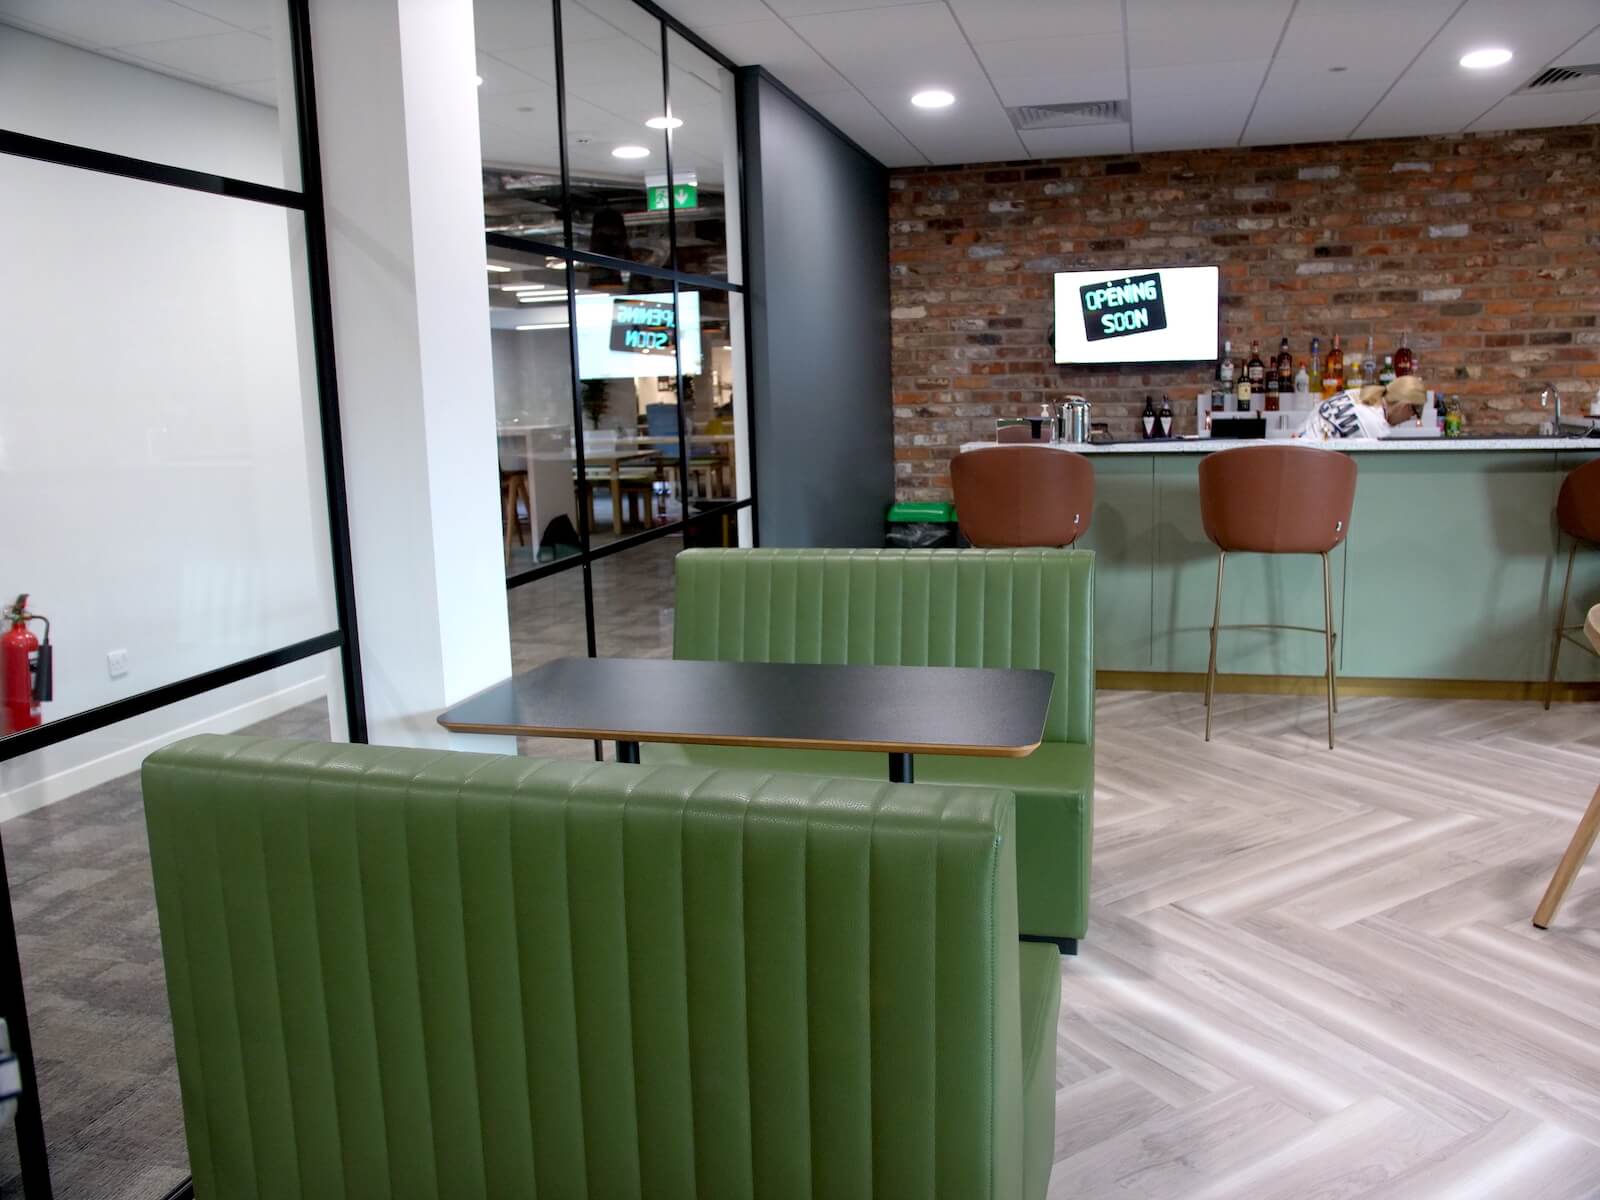 Office bars: novelty trend or valuable design tactic? - Penketh Group